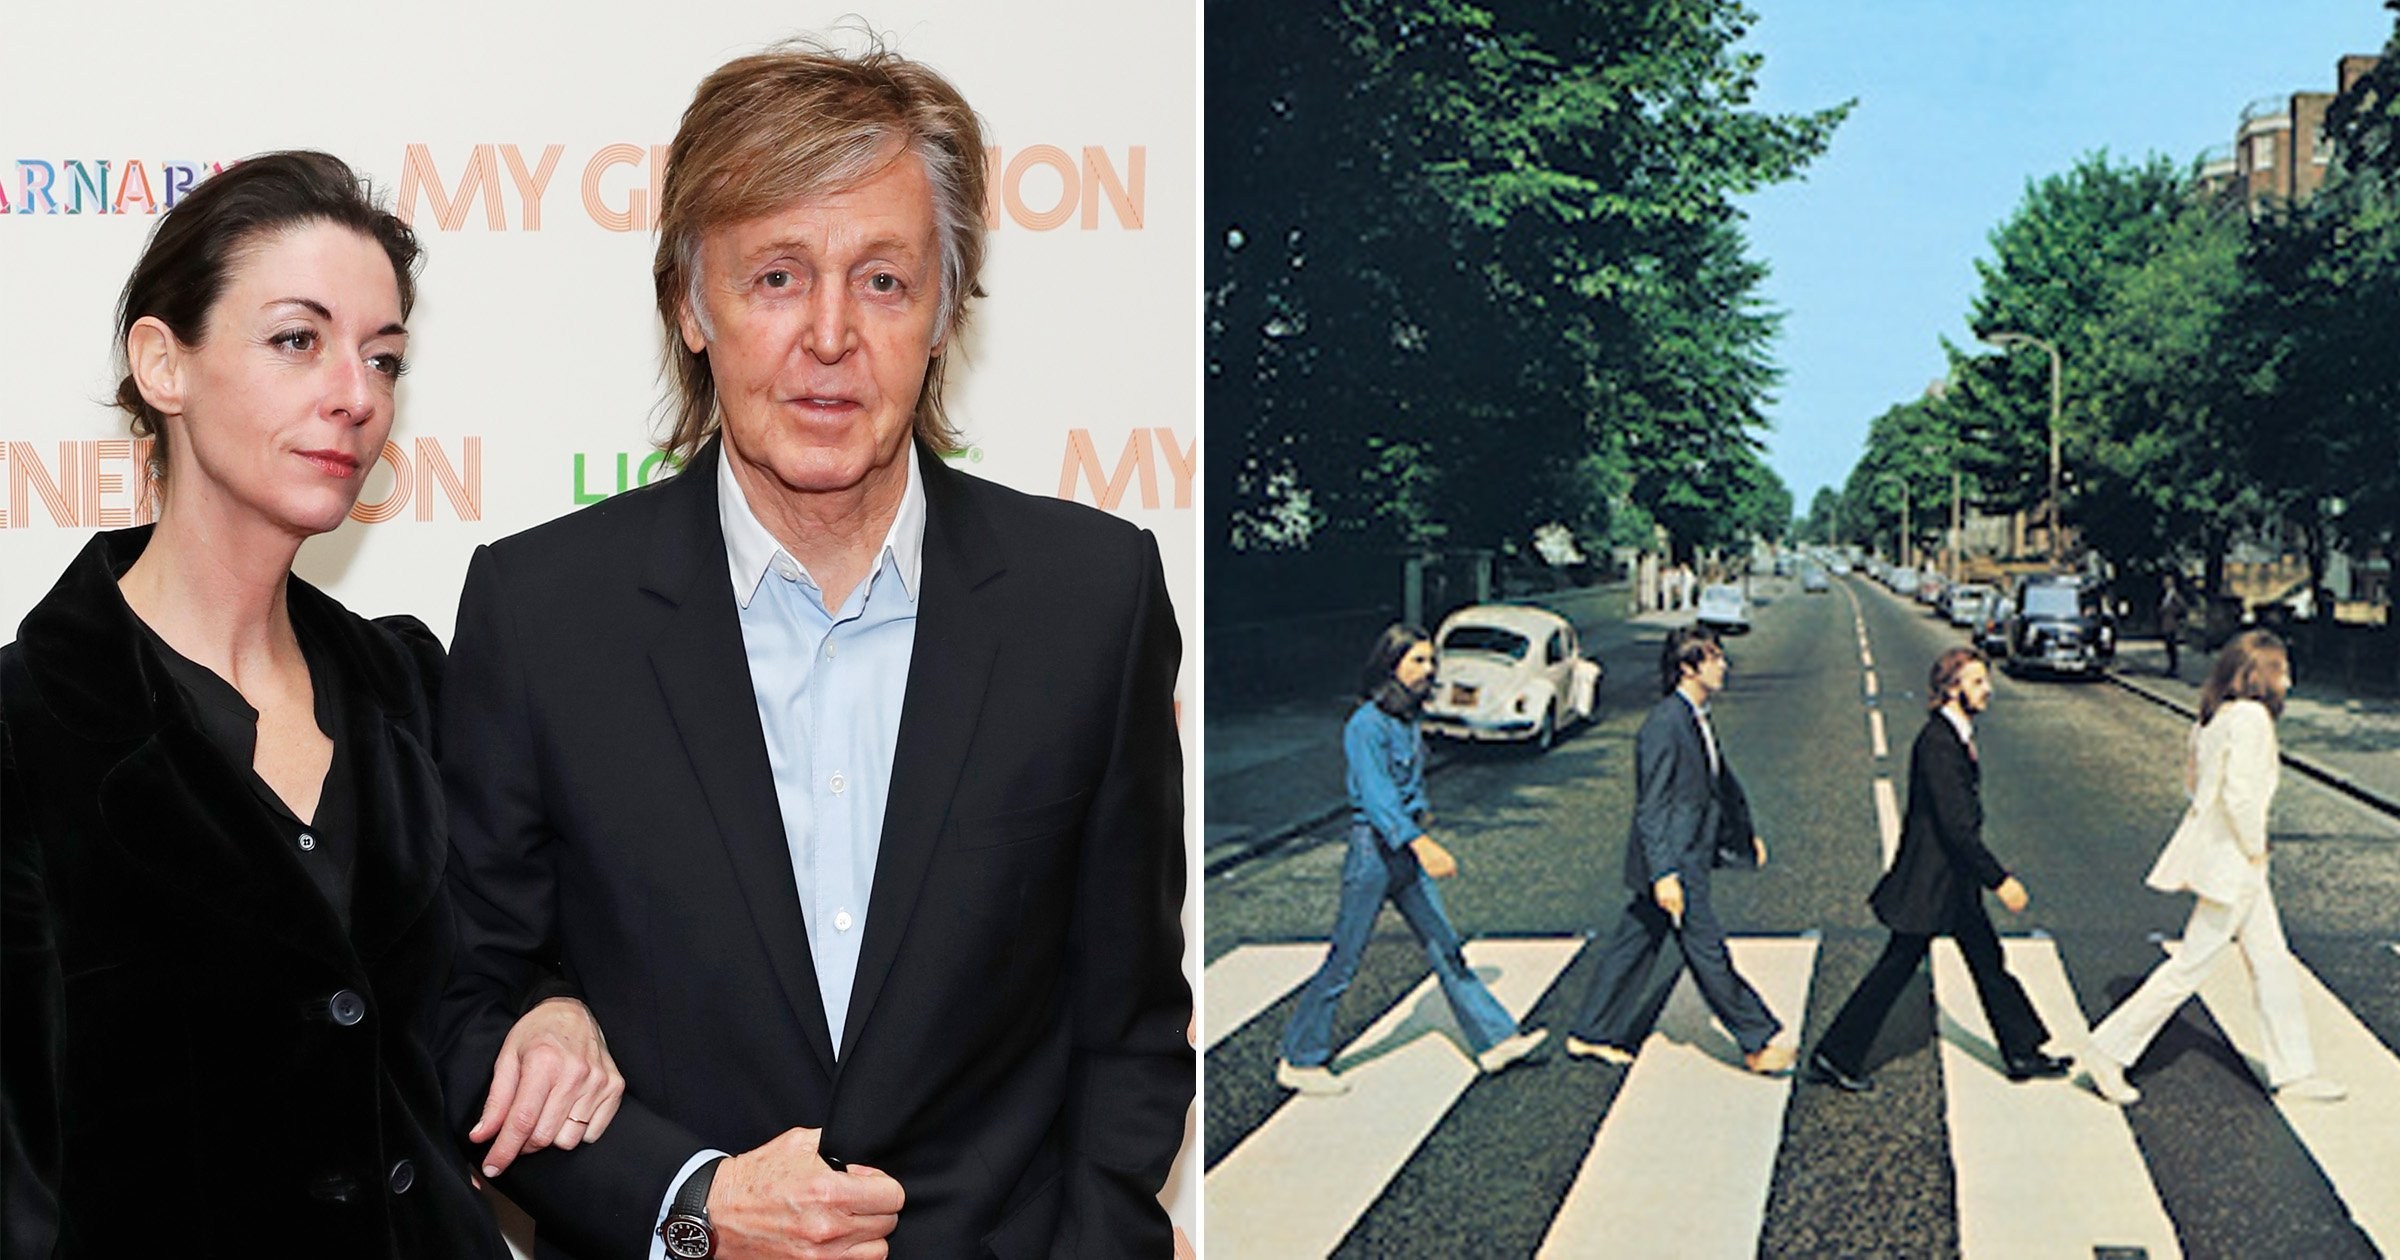 Sir Paul McCartney’s daughter Mary does The Beatles proud as she directs documentary on Abbey Road Studios